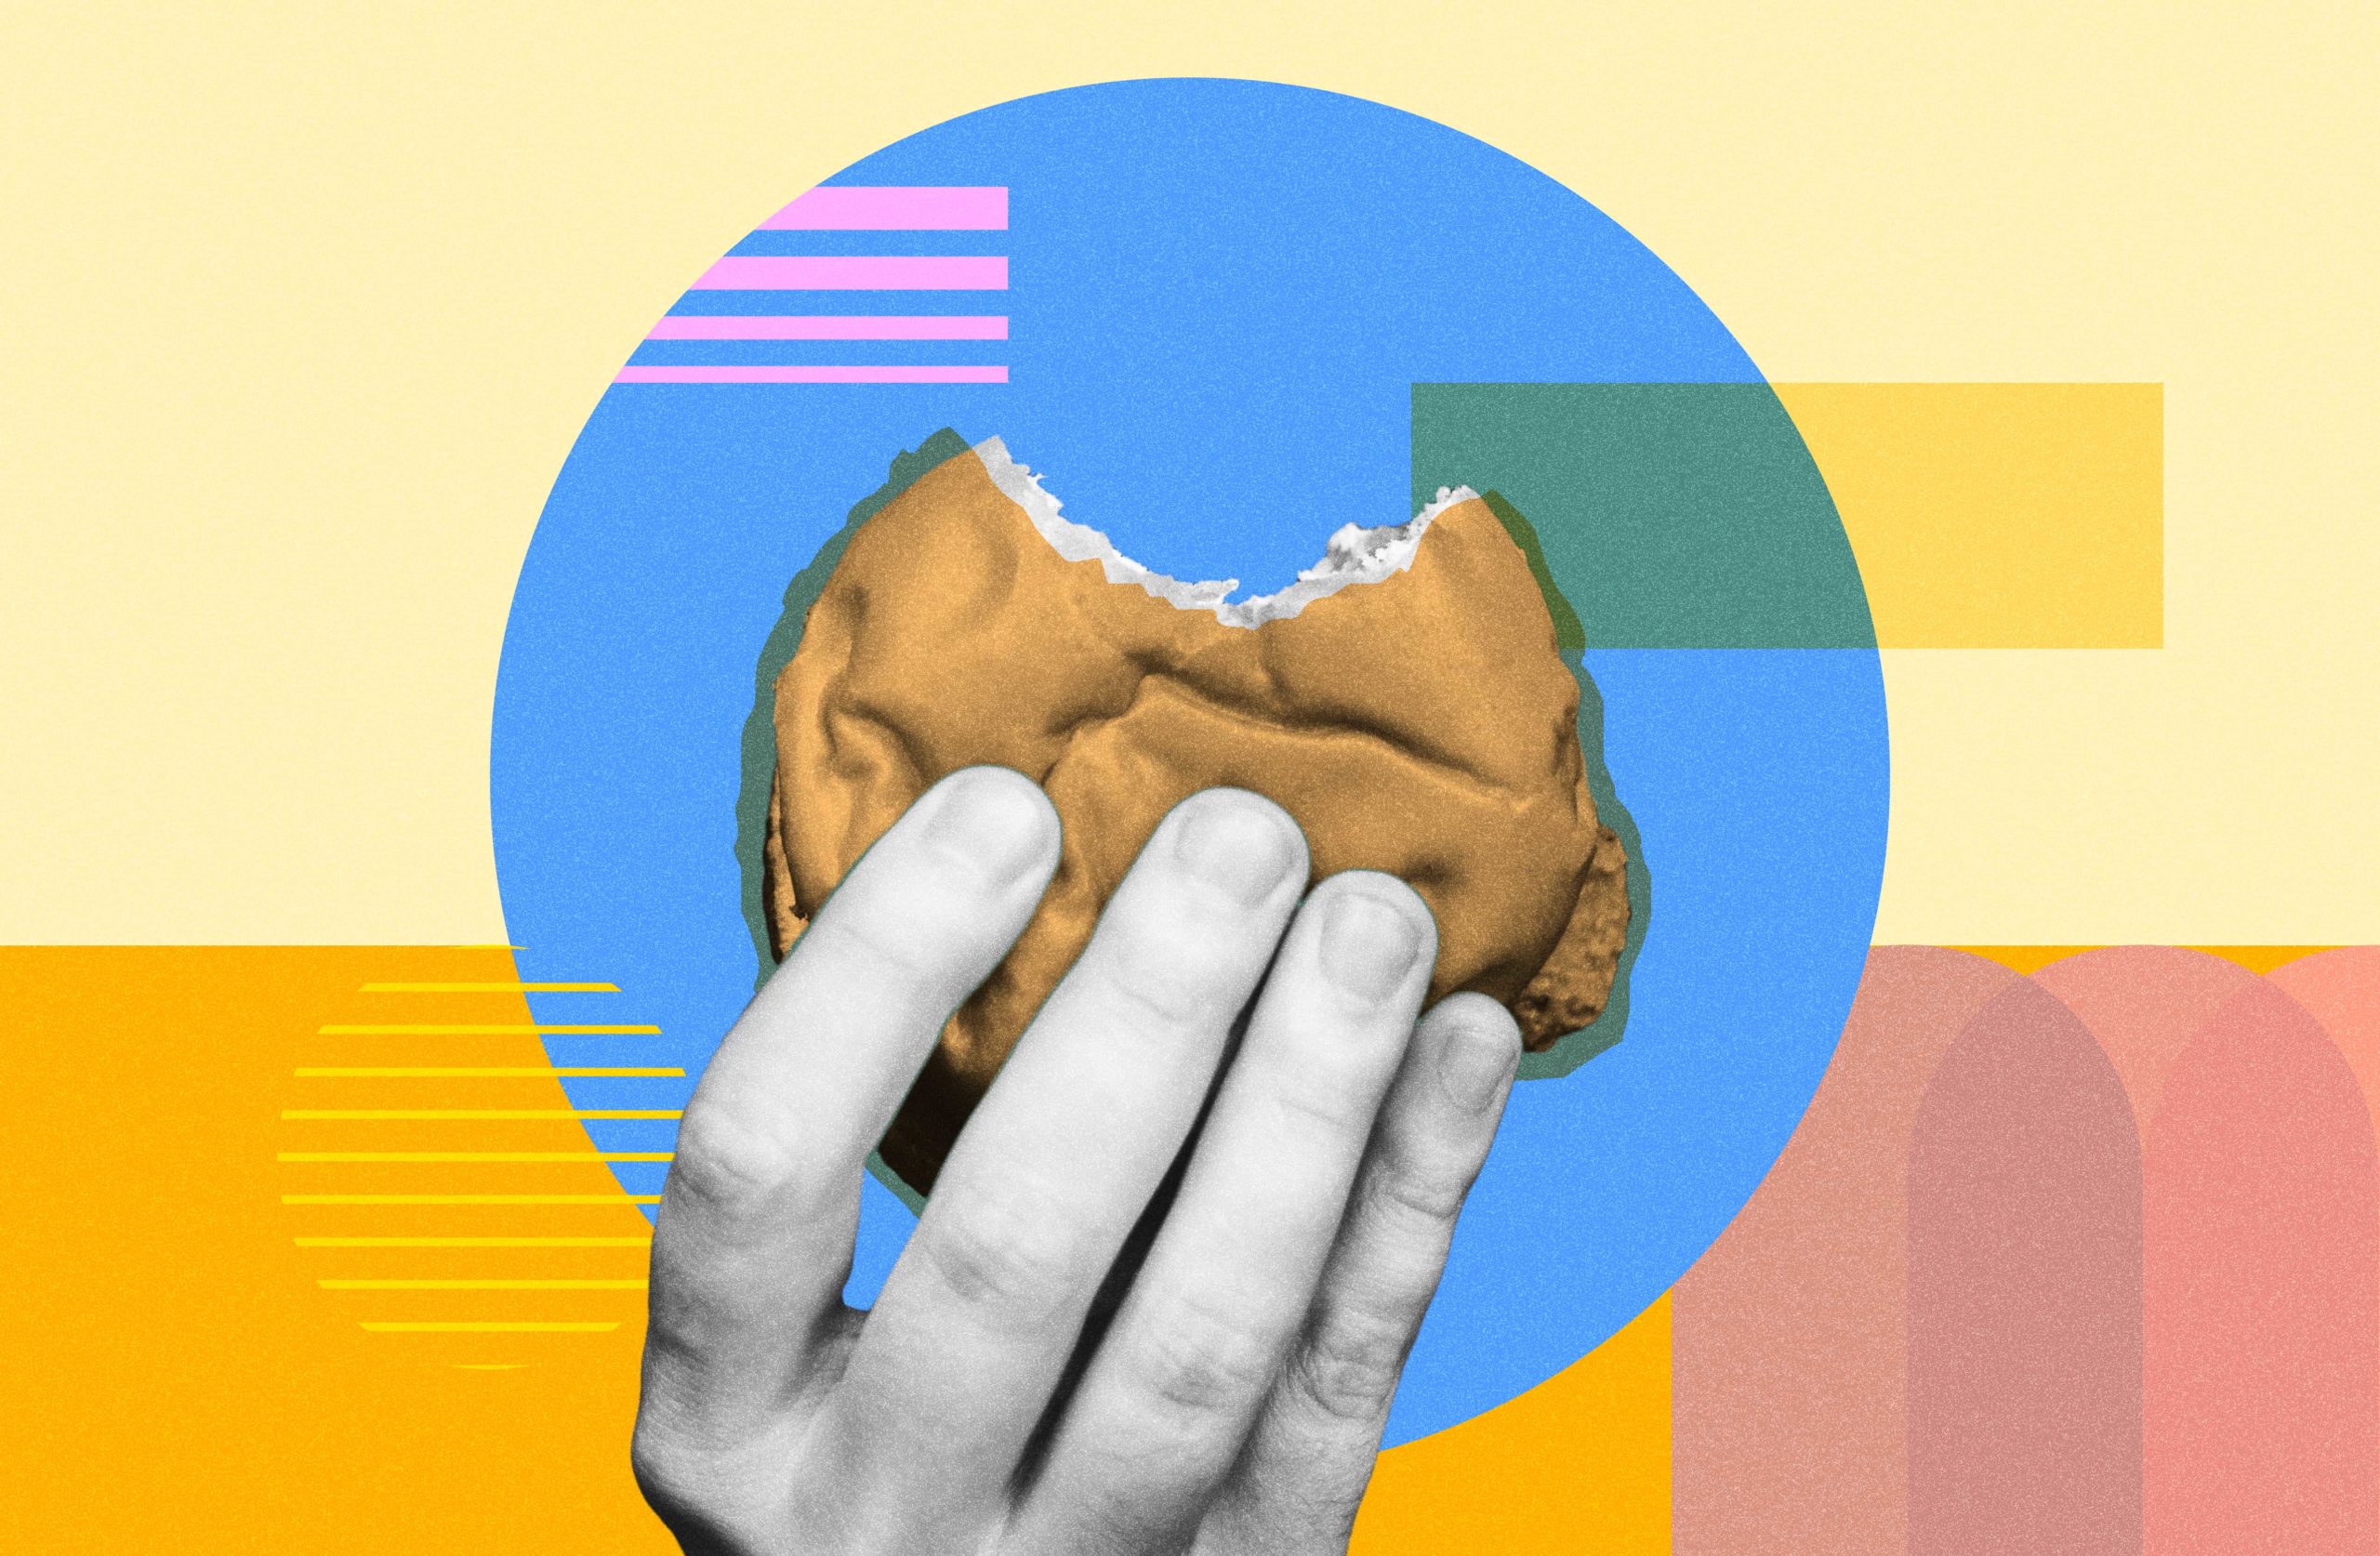 https://pakfactory.com/blog/wp-content/uploads/2021/07/banner-Edible-Packaging-The-Fast-Approaching-Sustainable-Packaging-Trend-scaled.jpg